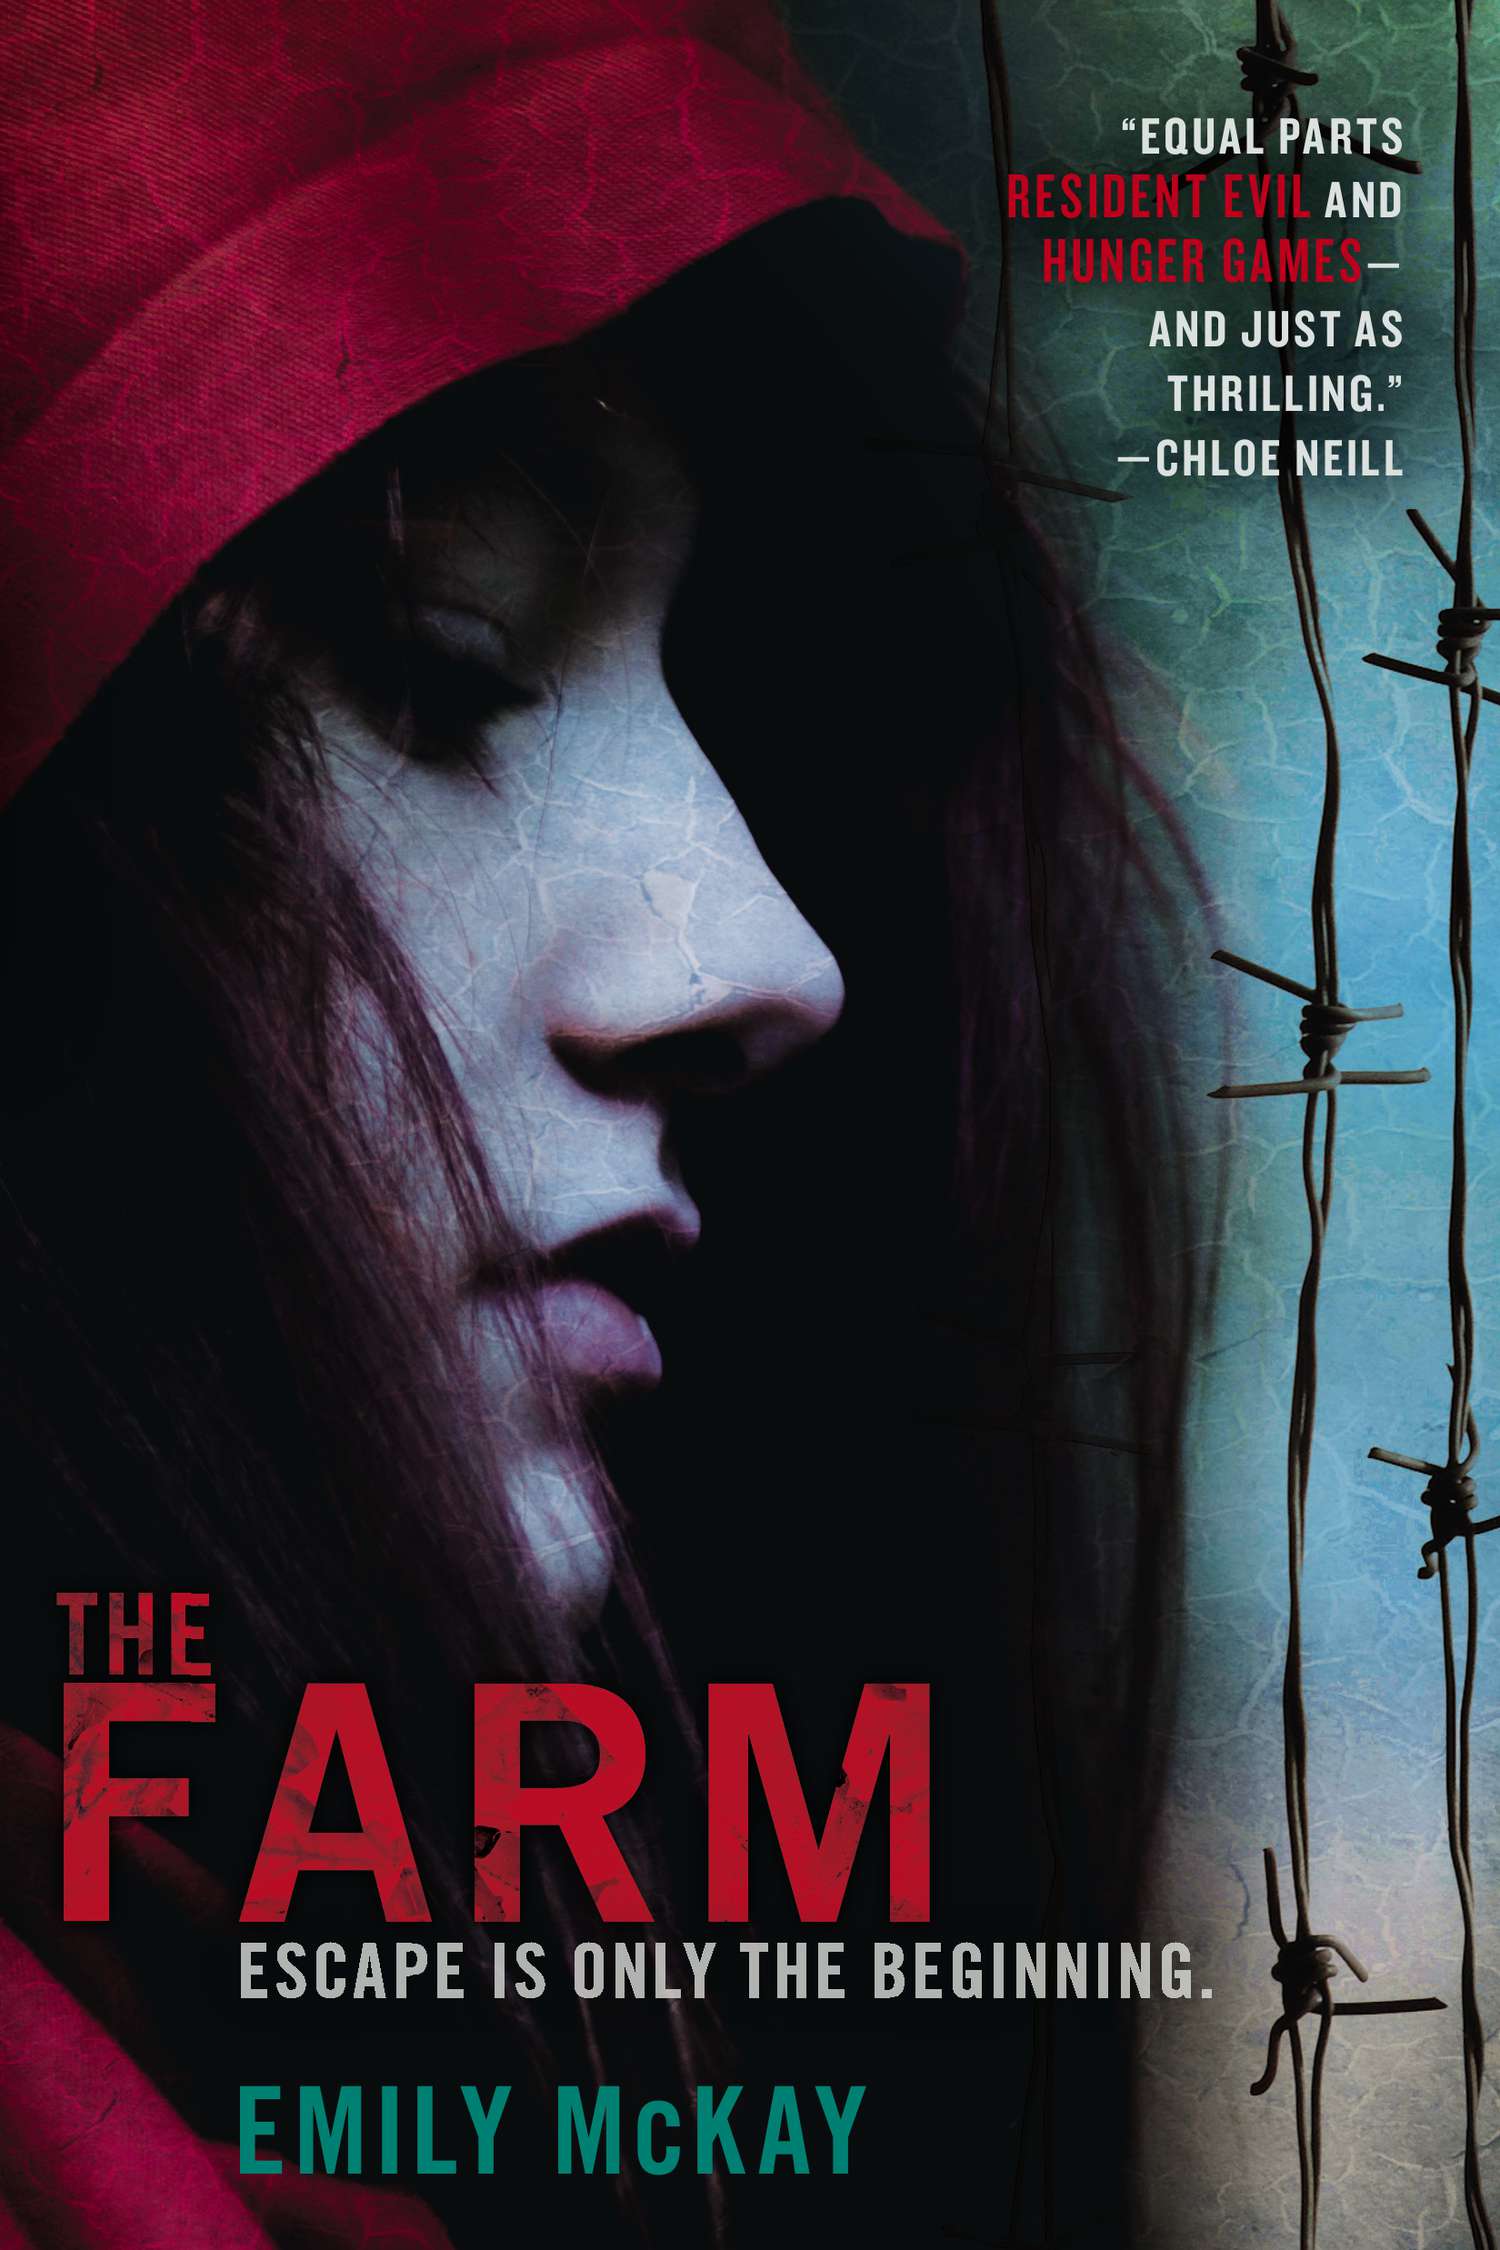 The Farm by Emily McKay book cover